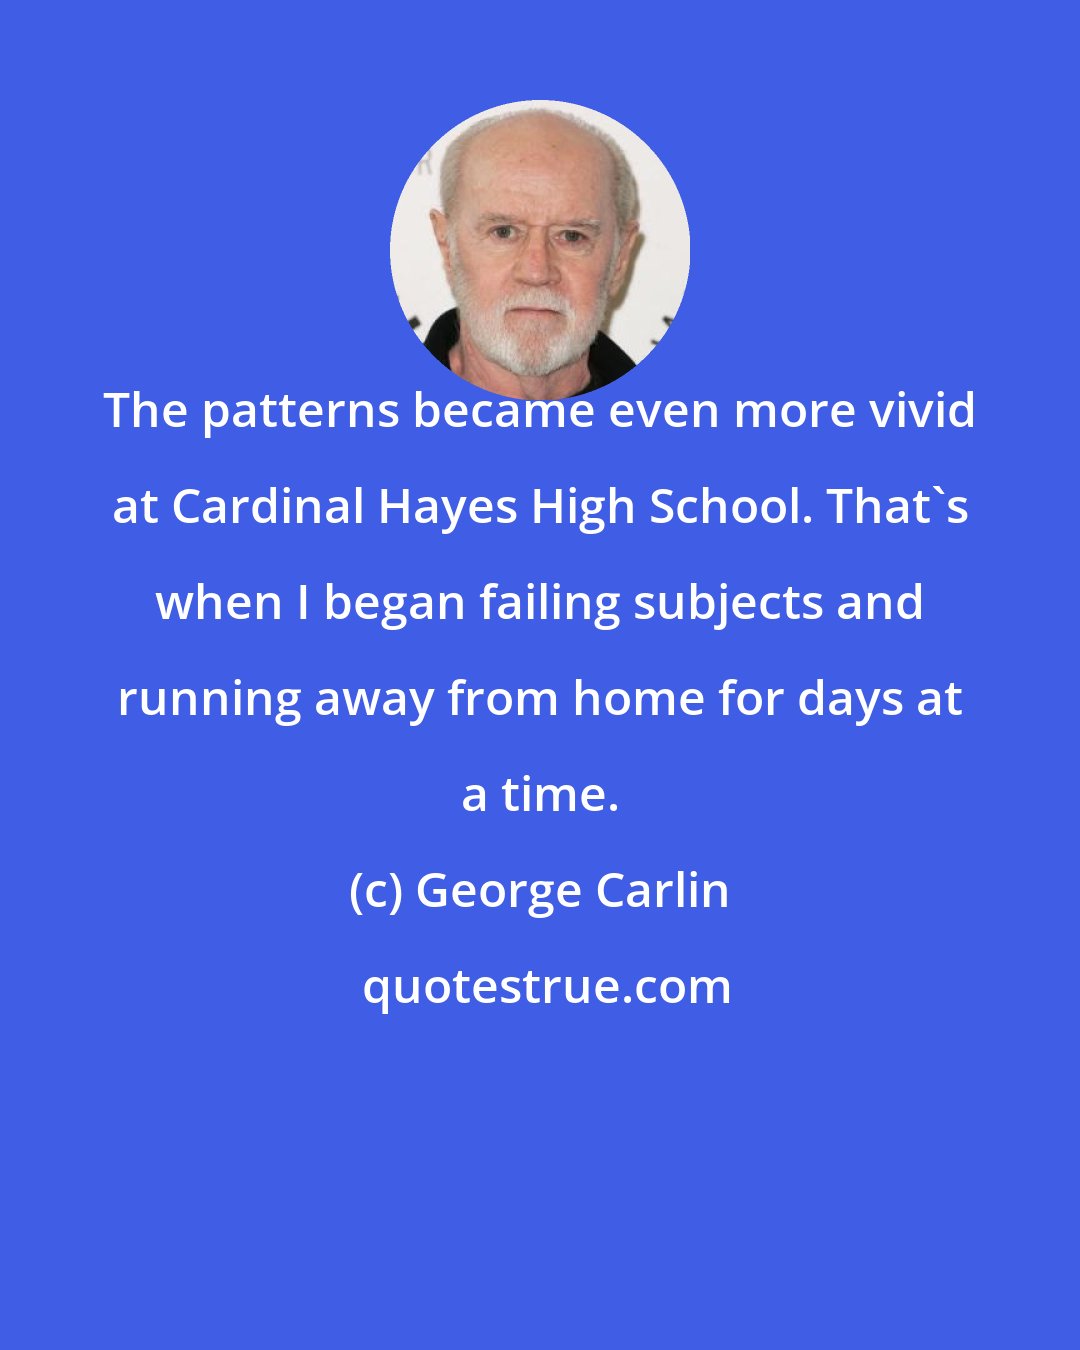 George Carlin: The patterns became even more vivid at Cardinal Hayes High School. That's when I began failing subjects and running away from home for days at a time.